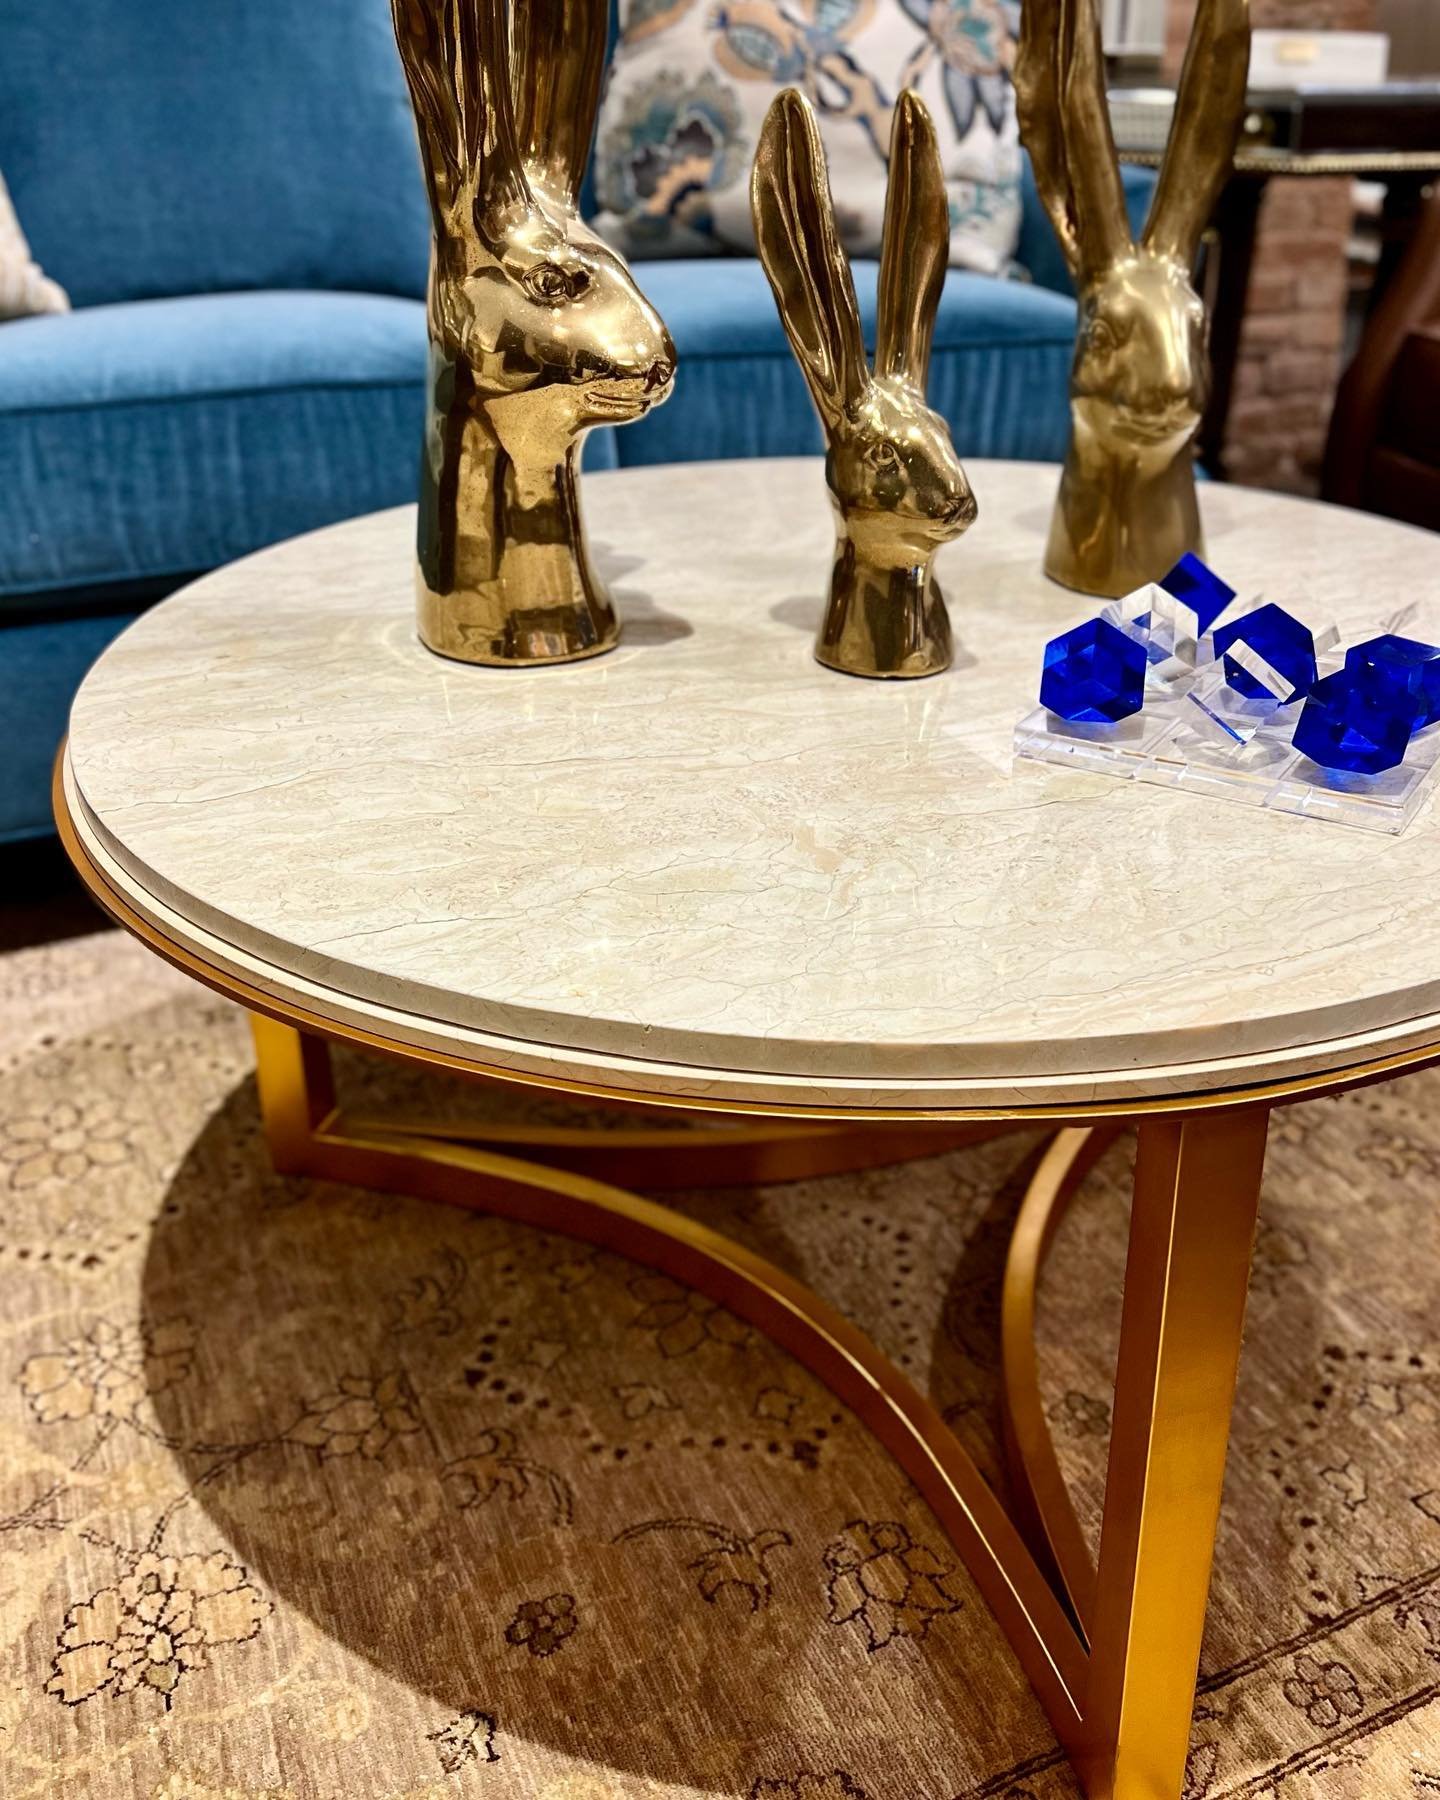 Let&rsquo;s take a moment for MARBLE! 

#marble #marbletable #marbletabletop #stonetop #stonetoptable #cocktailtable #coffeetable #accenttable #sidetable #finefurniture #homedecor #interiordesign #shoplocal #shopsmall #shopnorman #downtownnorman #mis